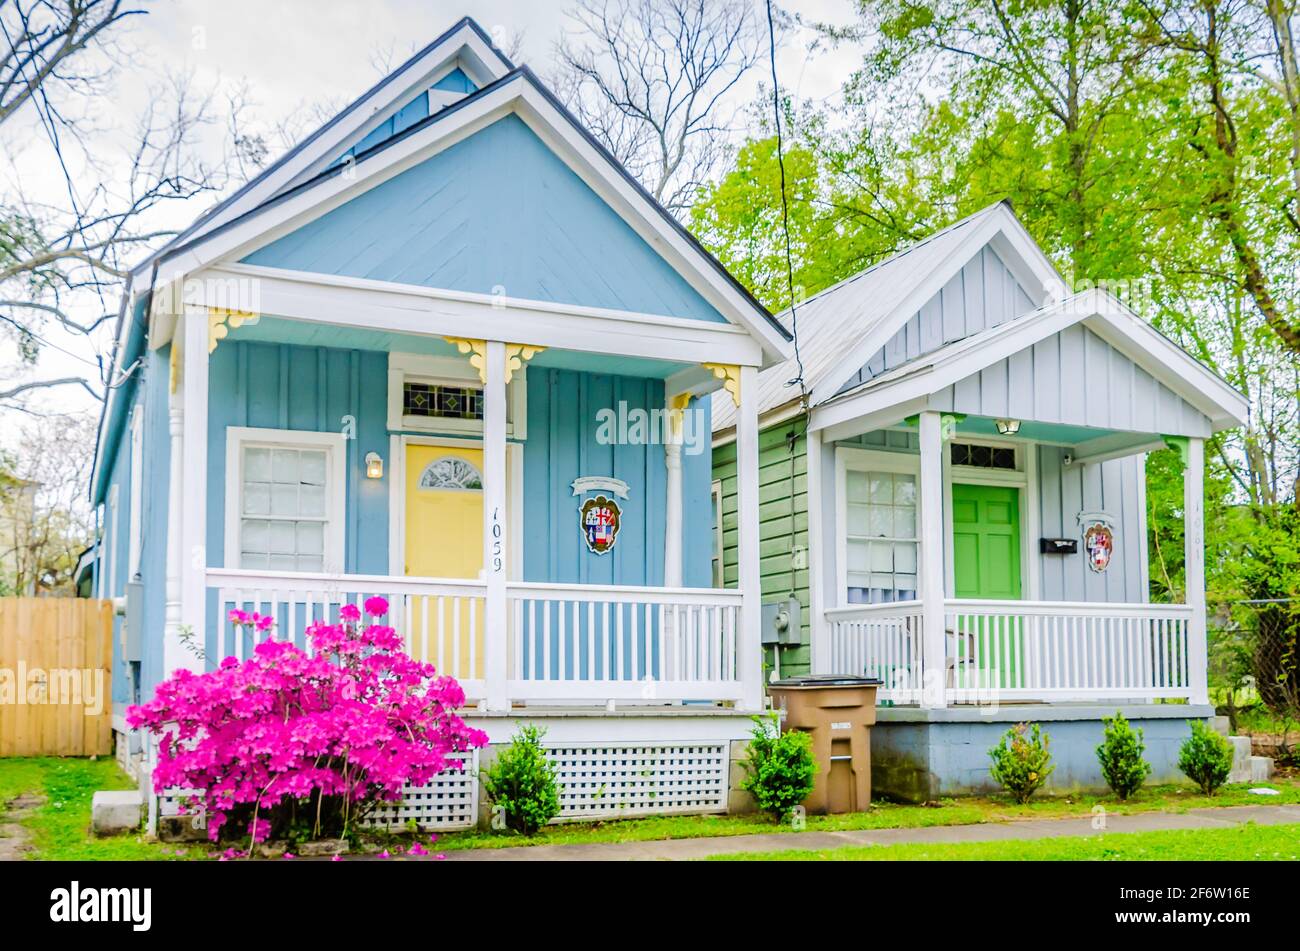 Century-old shotgun houses are repurposed as Airbnb vacation rentals on Caroline Avenue in the Old Dauphin Way Historic District in Mobile, Alabama. Stock Photo